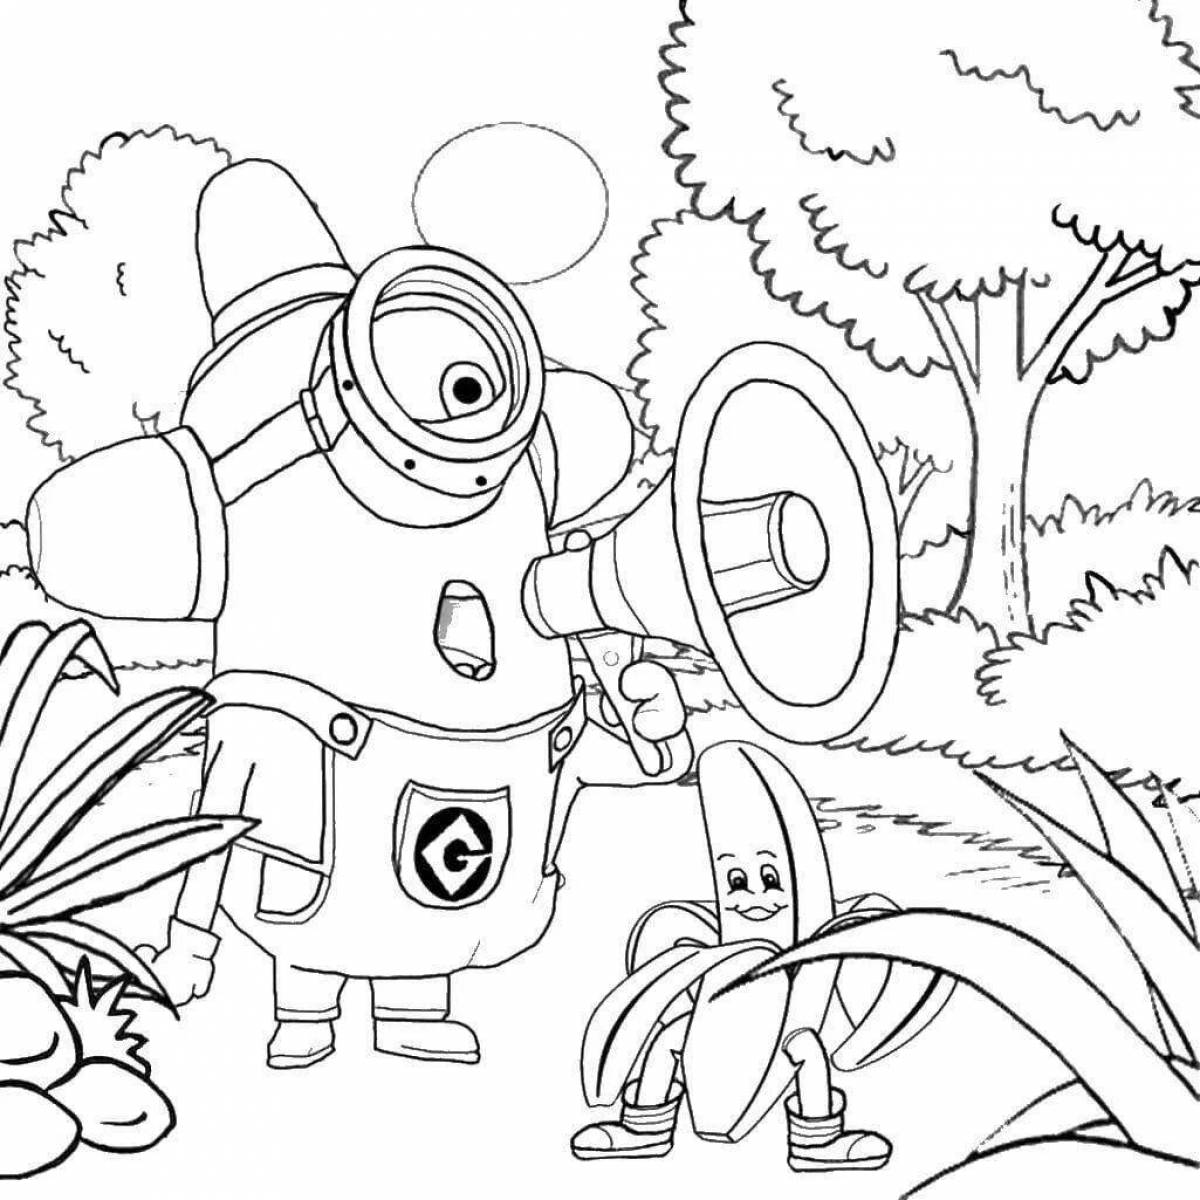 Playful cartoon coloring book for 6-7 year olds